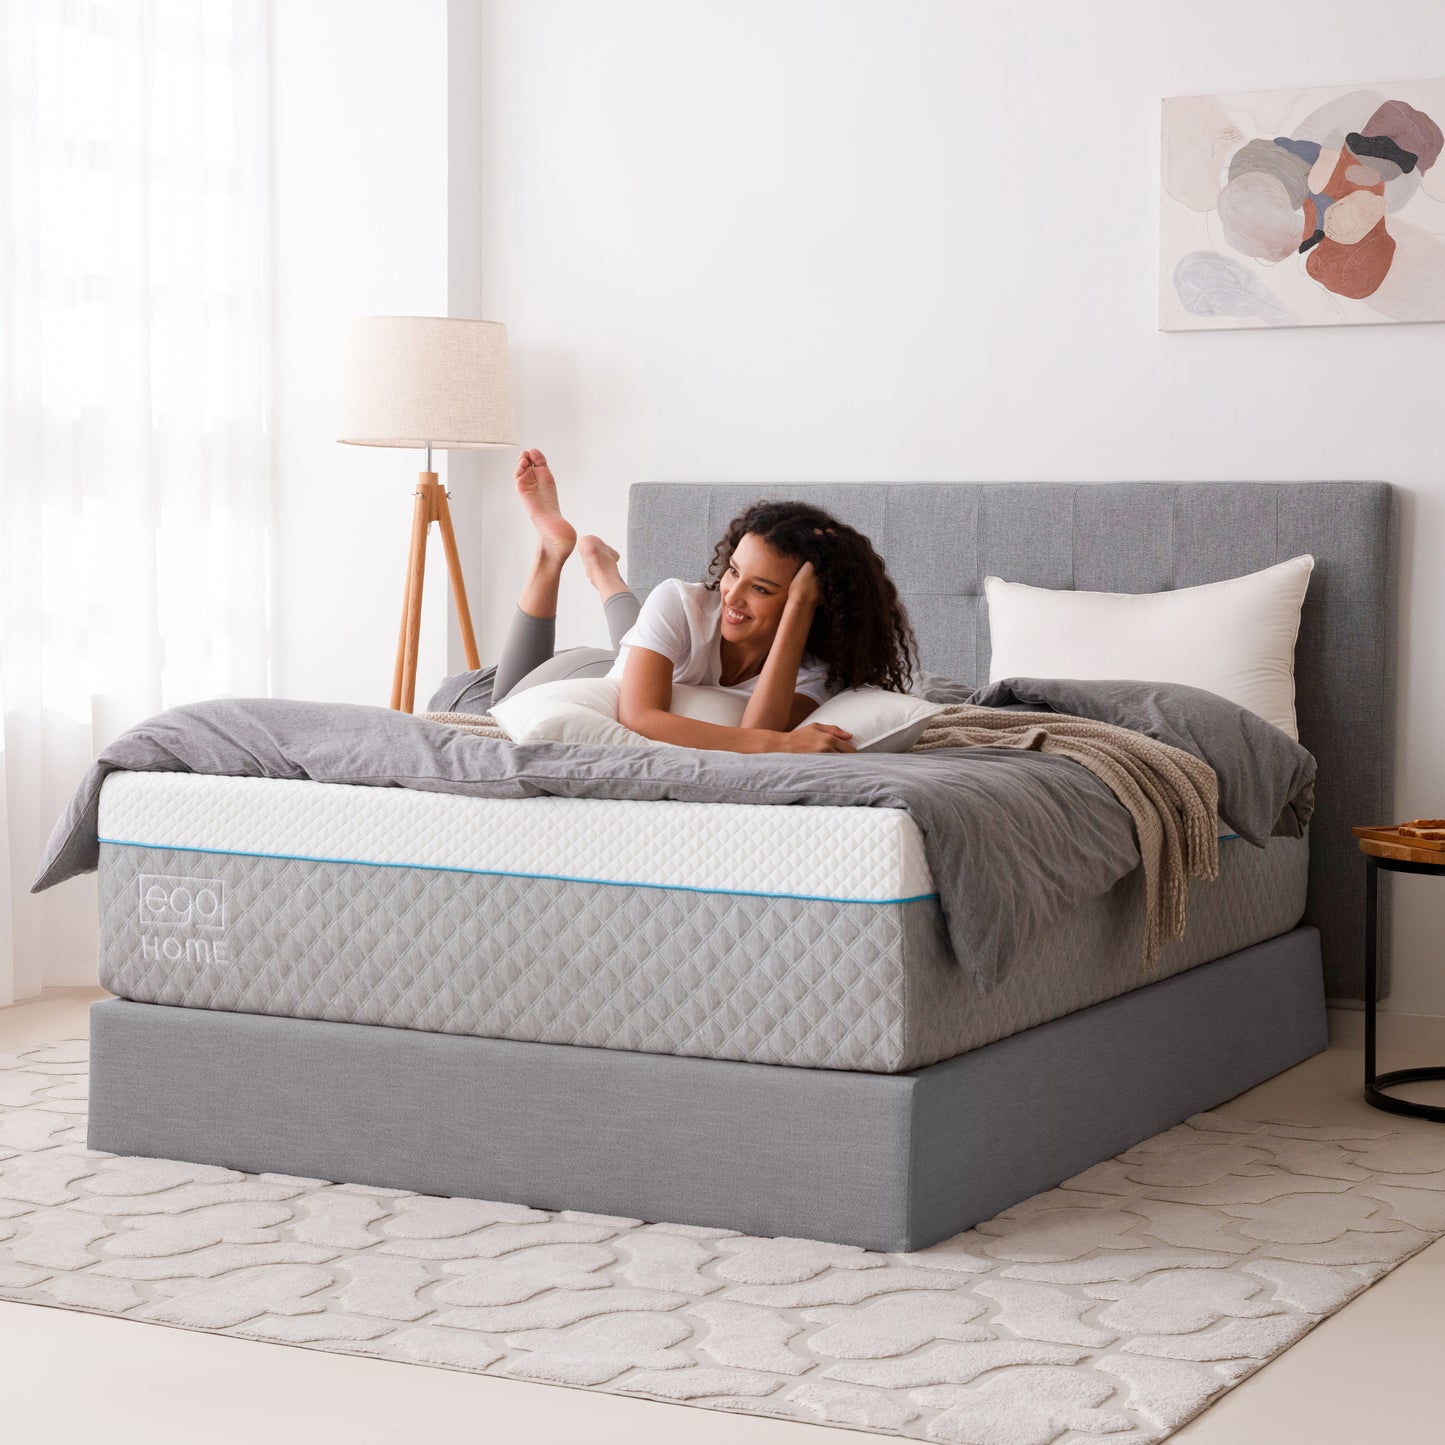 EGO Cradling Memory Foam Mattress with Soft Cover